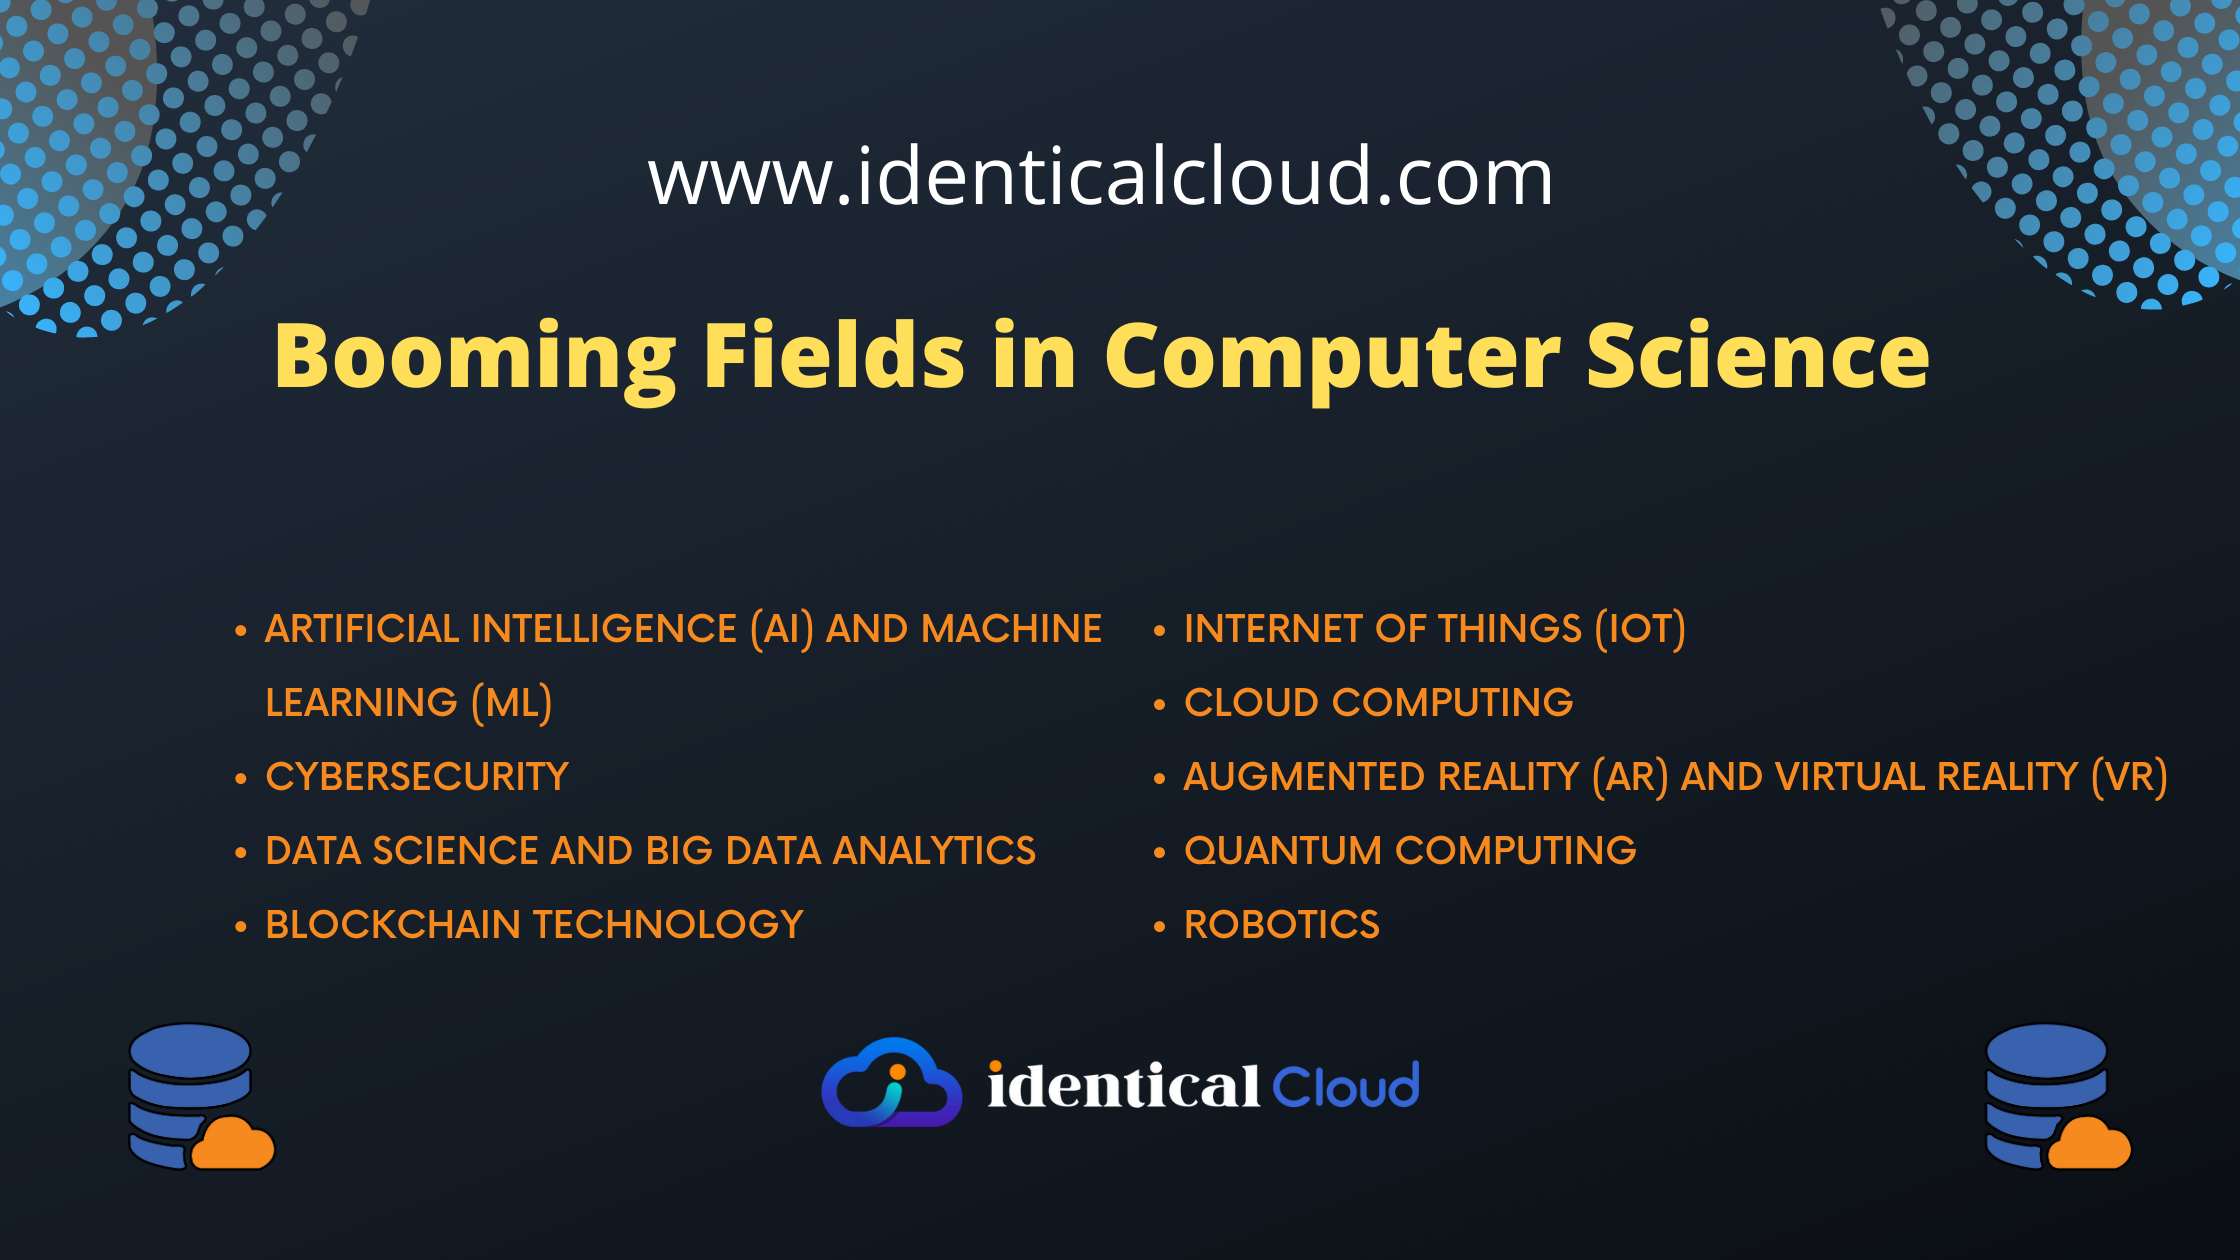 Booming Fields in Computer Science - identicalcloud.com